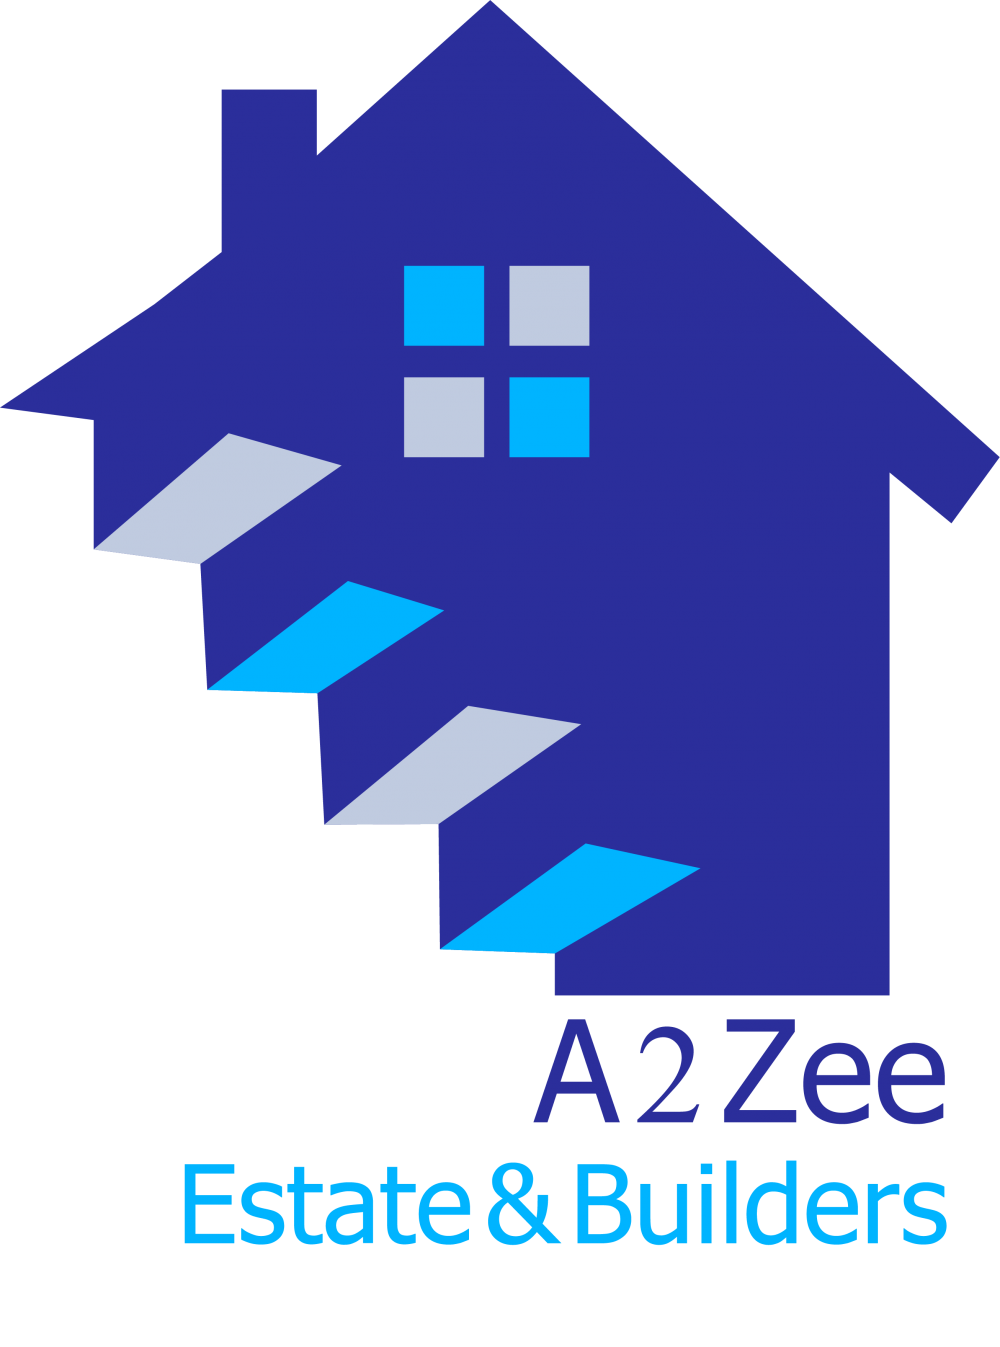 Realestate Agent Muhammad  Ansar  working in Realestate Agency A 2 Zee Estate & Builders 